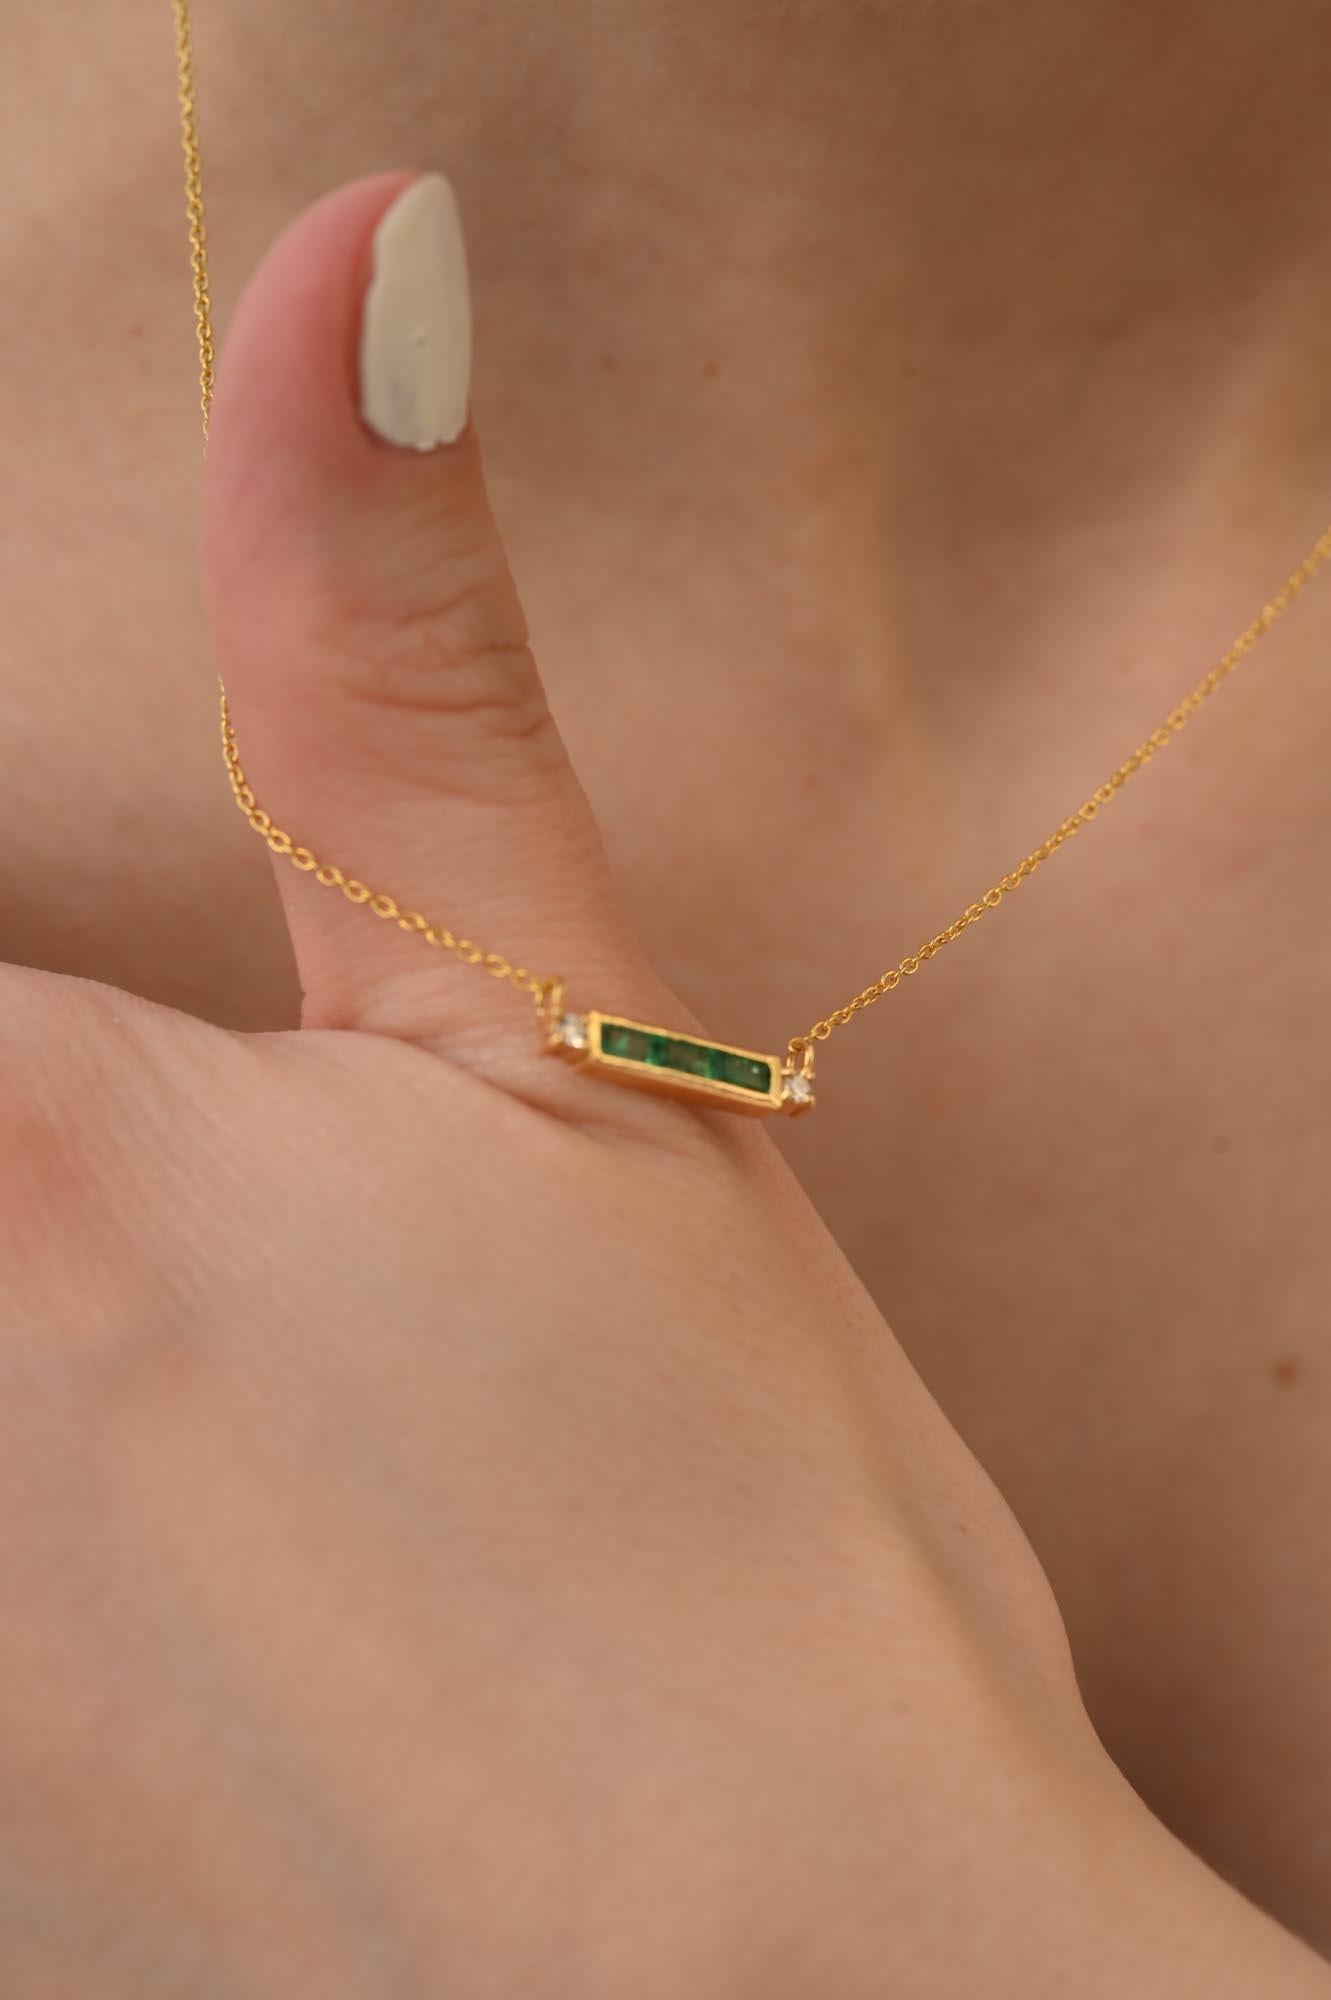 Modern 14k Solid Yellow Gold Diamond Emerald Baguette Bar Necklace, Thank You Gift For Sale